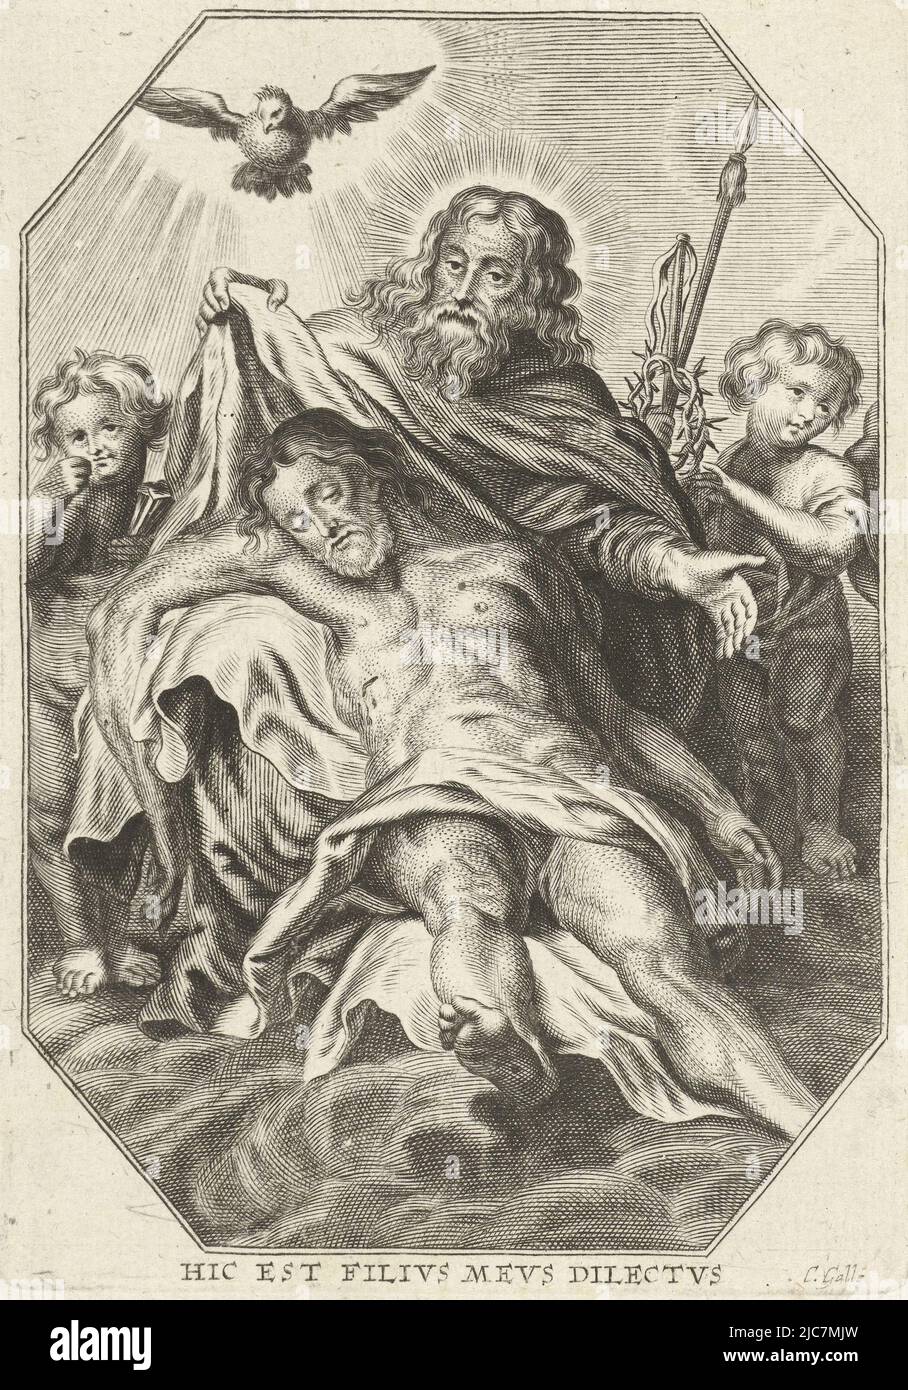 God the Father with the body of Christ in his lap. Above them hovers the Holy Spirit in the form of a dove. On either side two angels bearing the instruments of the passion. God the Father with the body of Christ, print maker: Cornelis Galle (II), (mentioned on object), print maker: Cornelis Galle (III), (mentioned on object), Antwerp, 1638 - 1678, paper, engraving, h 132 mm × w 93 mm Stock Photo